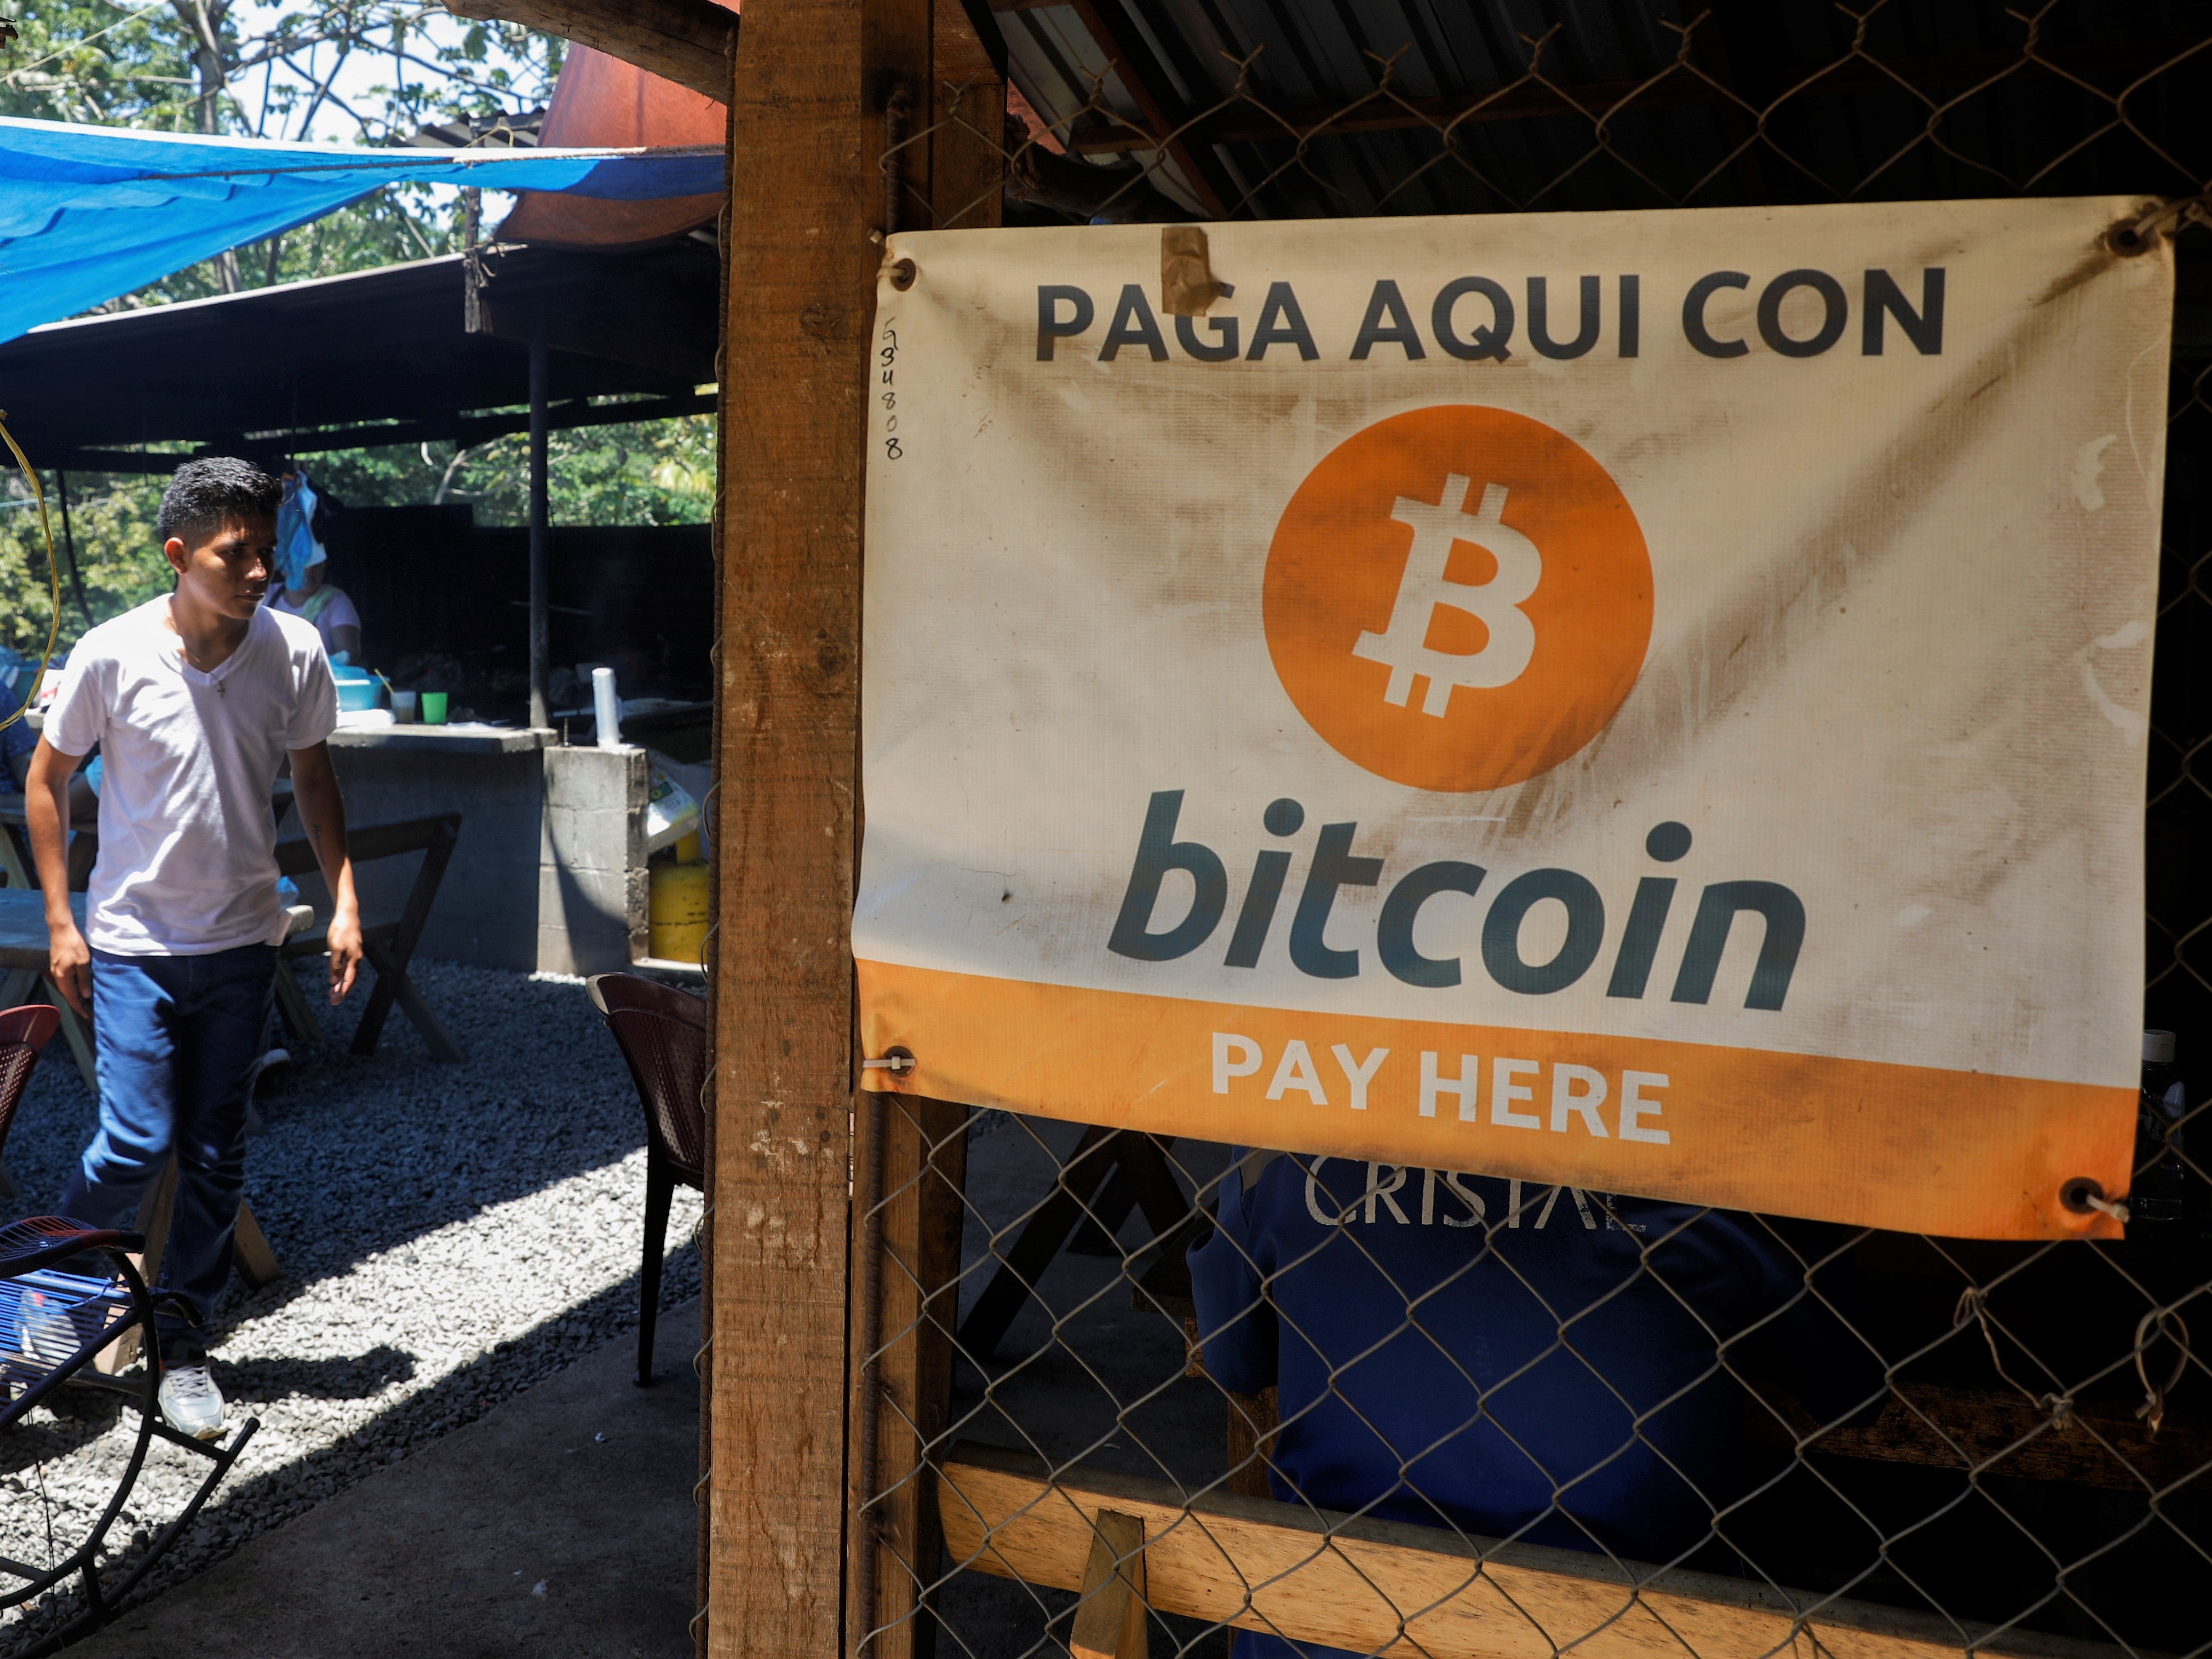 Bitcoin banners are seen outside of a small restaurant at El Zonte Beach in Chiltiupan, El Salvador 8 June, 2021